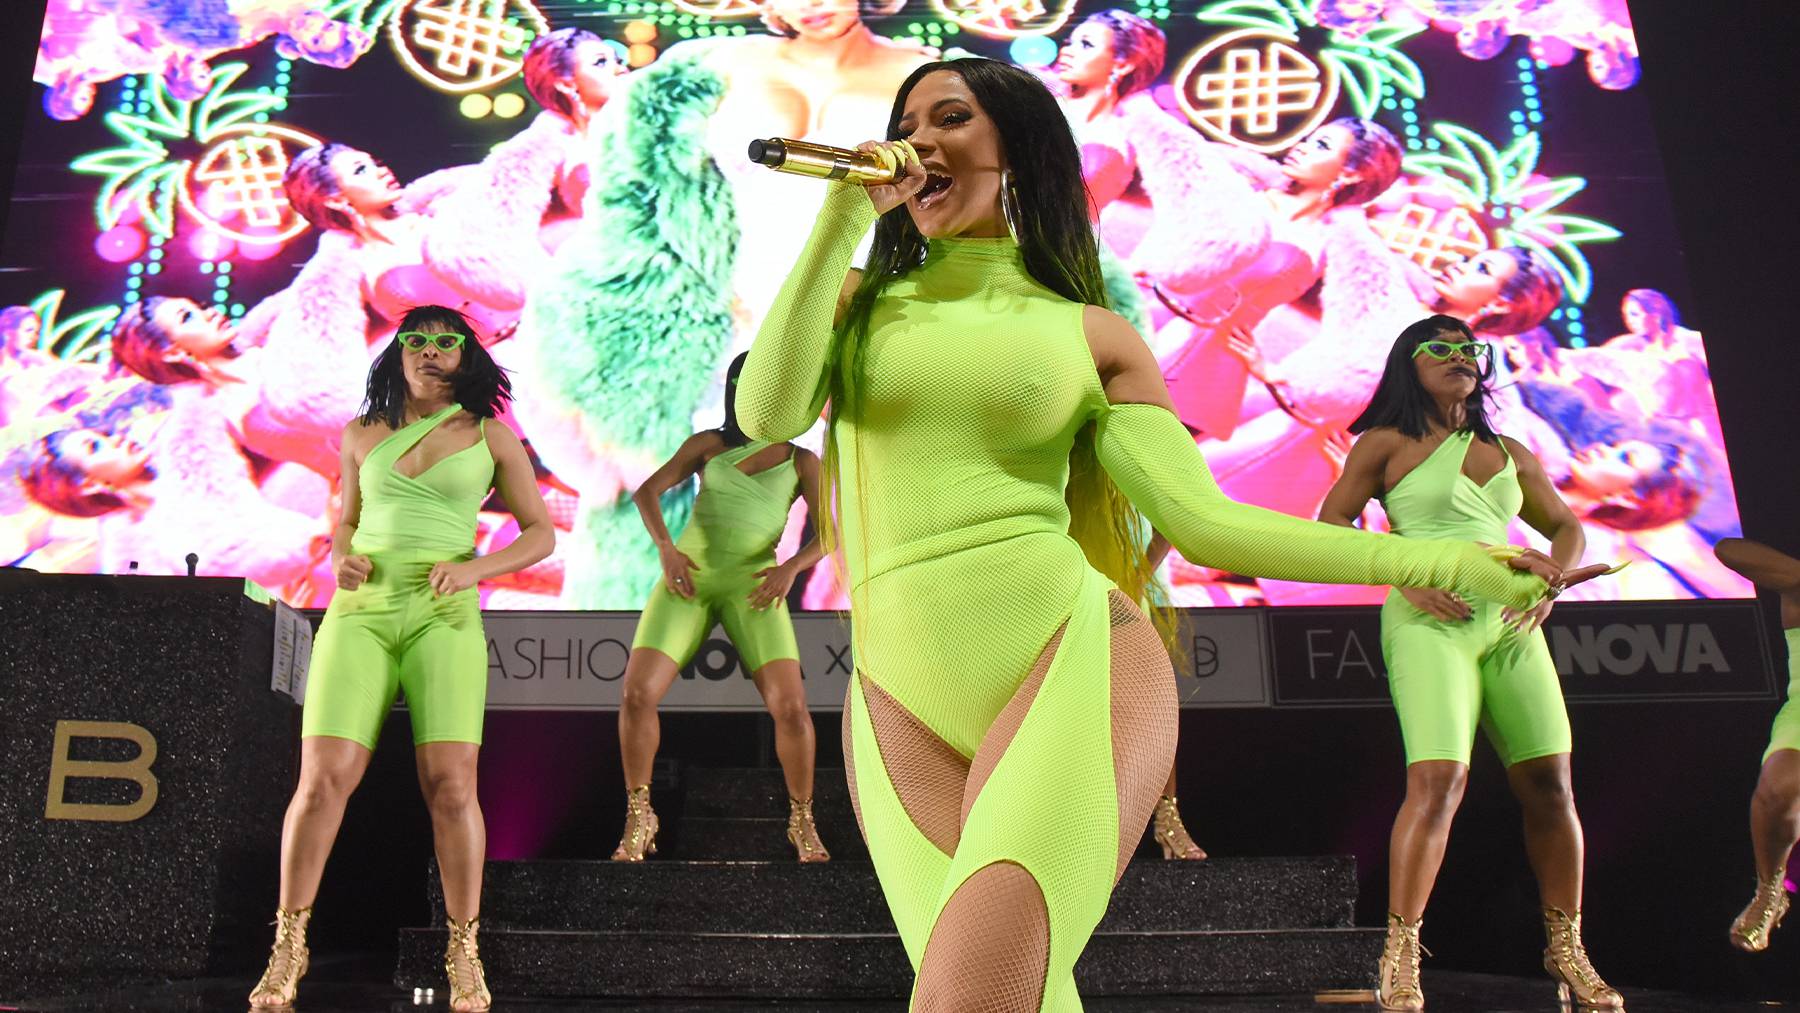 Cardi B performs onstage at Fashion Nova Presents: Party With Cardi in Los Angeles, 2019.